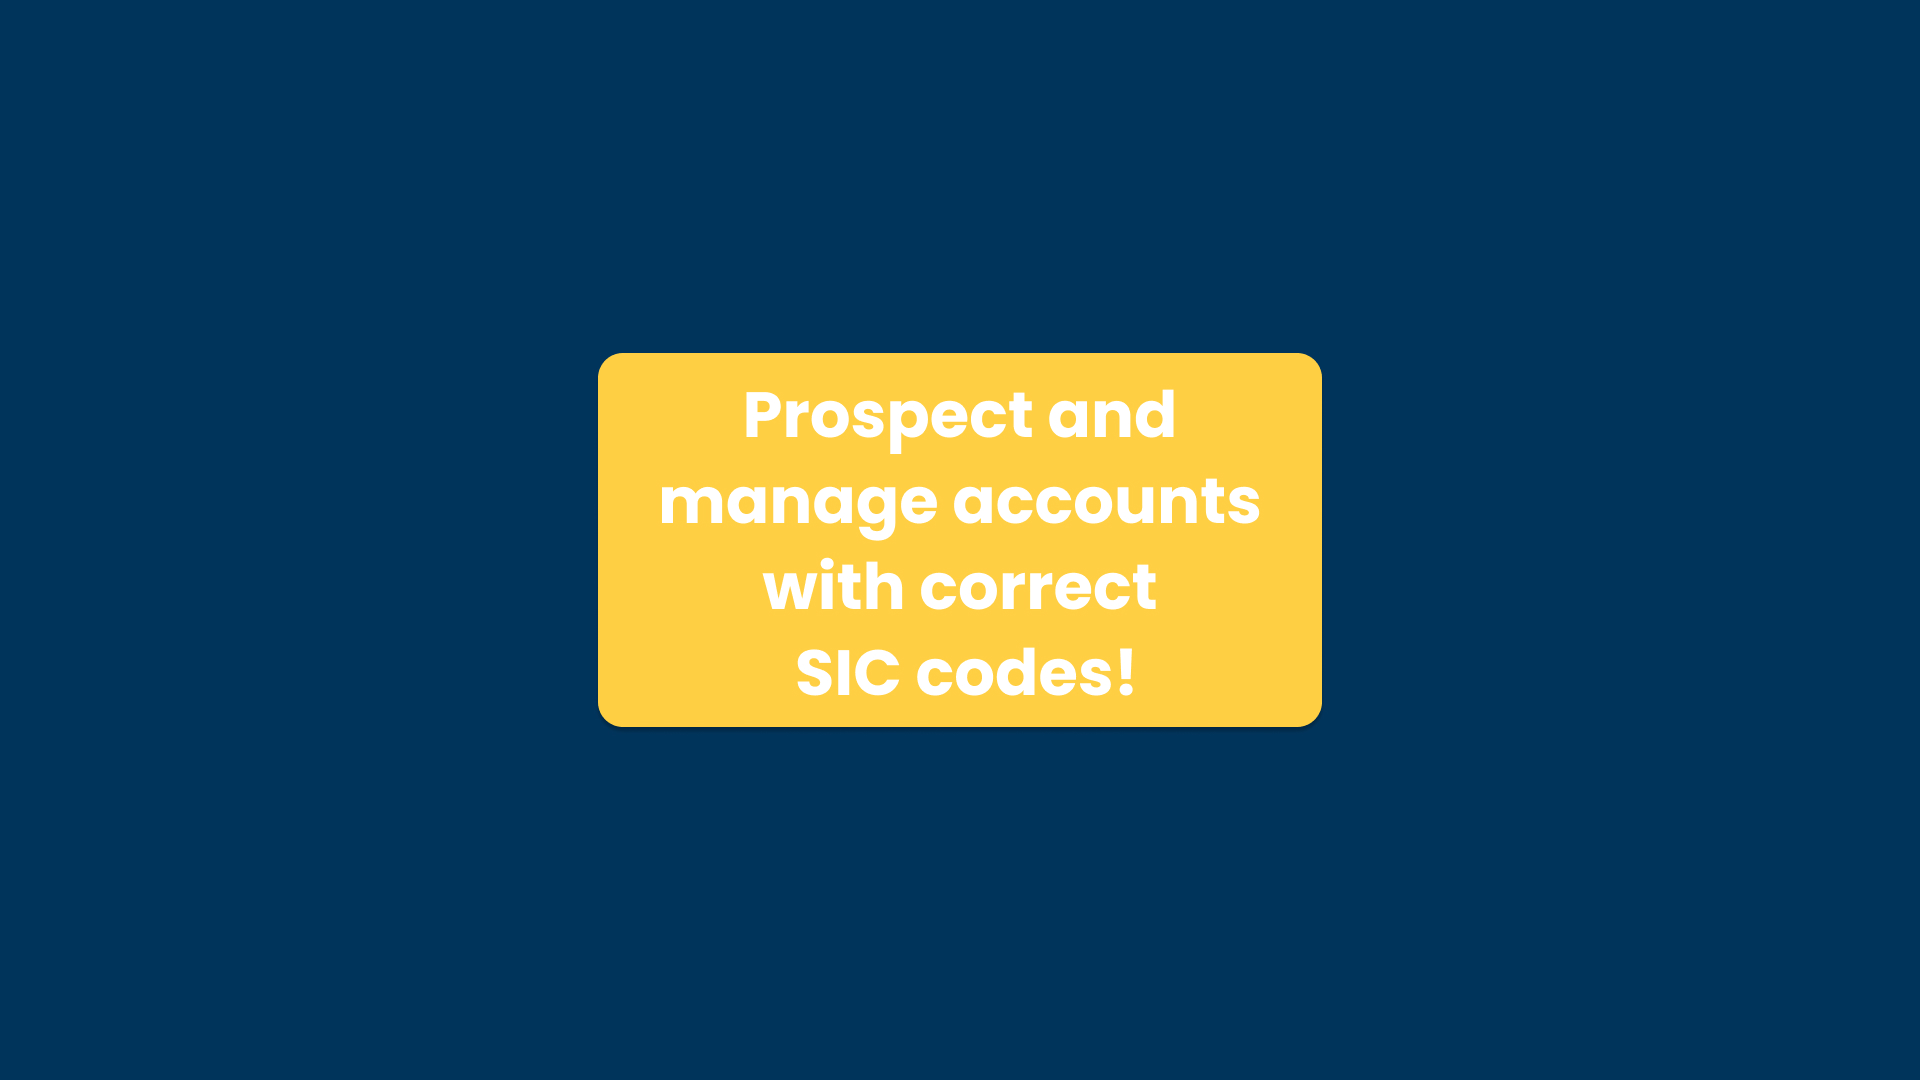 End users can download this Delpha conversation to ensure all your Accounts in Salesforce are up to date with the correct SIC code identifier.